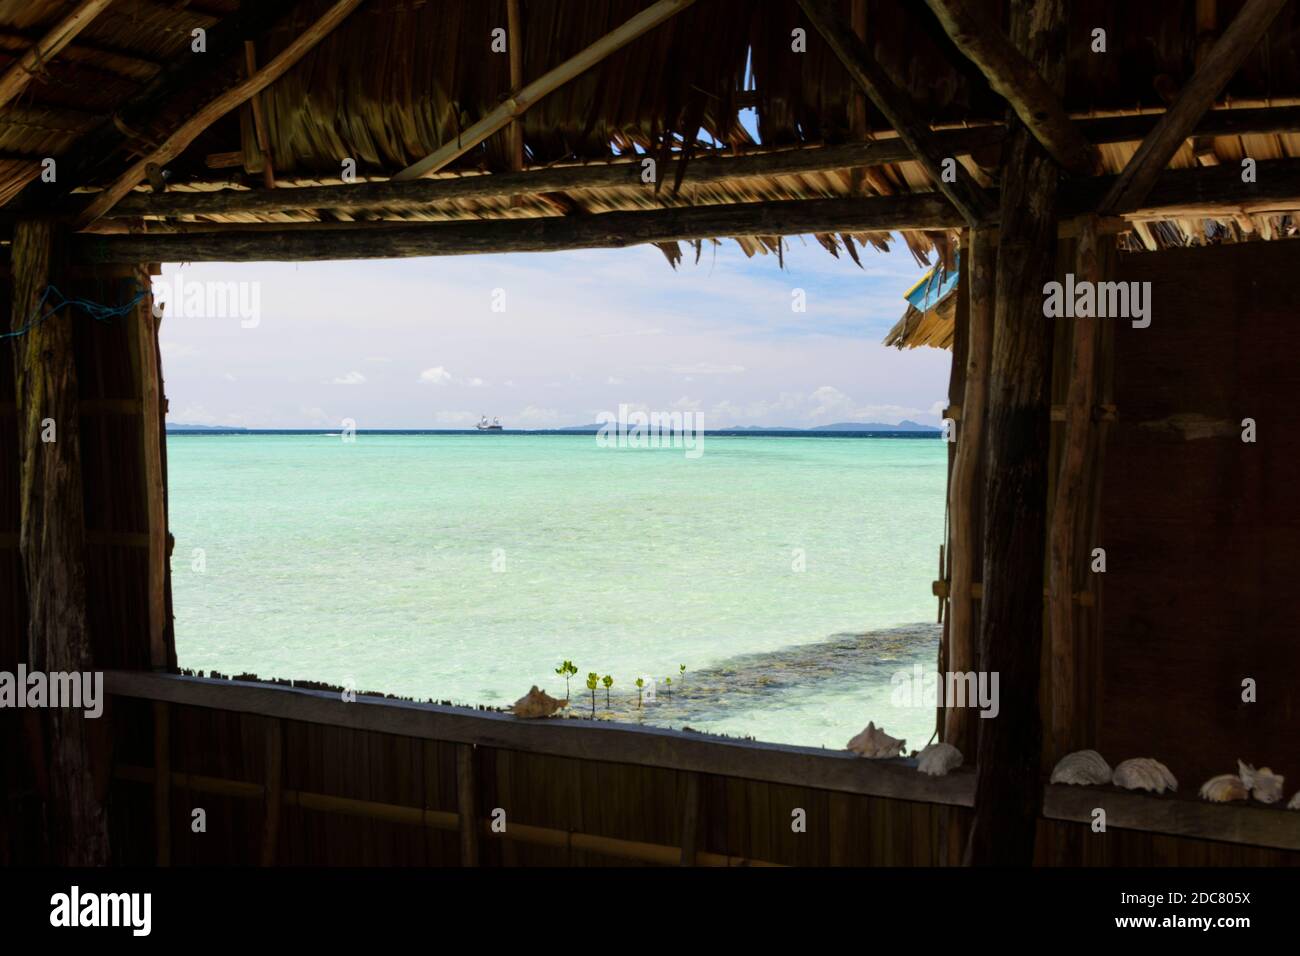 View from a wooden stilt house, Arborek, Raja Ampat, West Papua, Indonesia Stock Photo